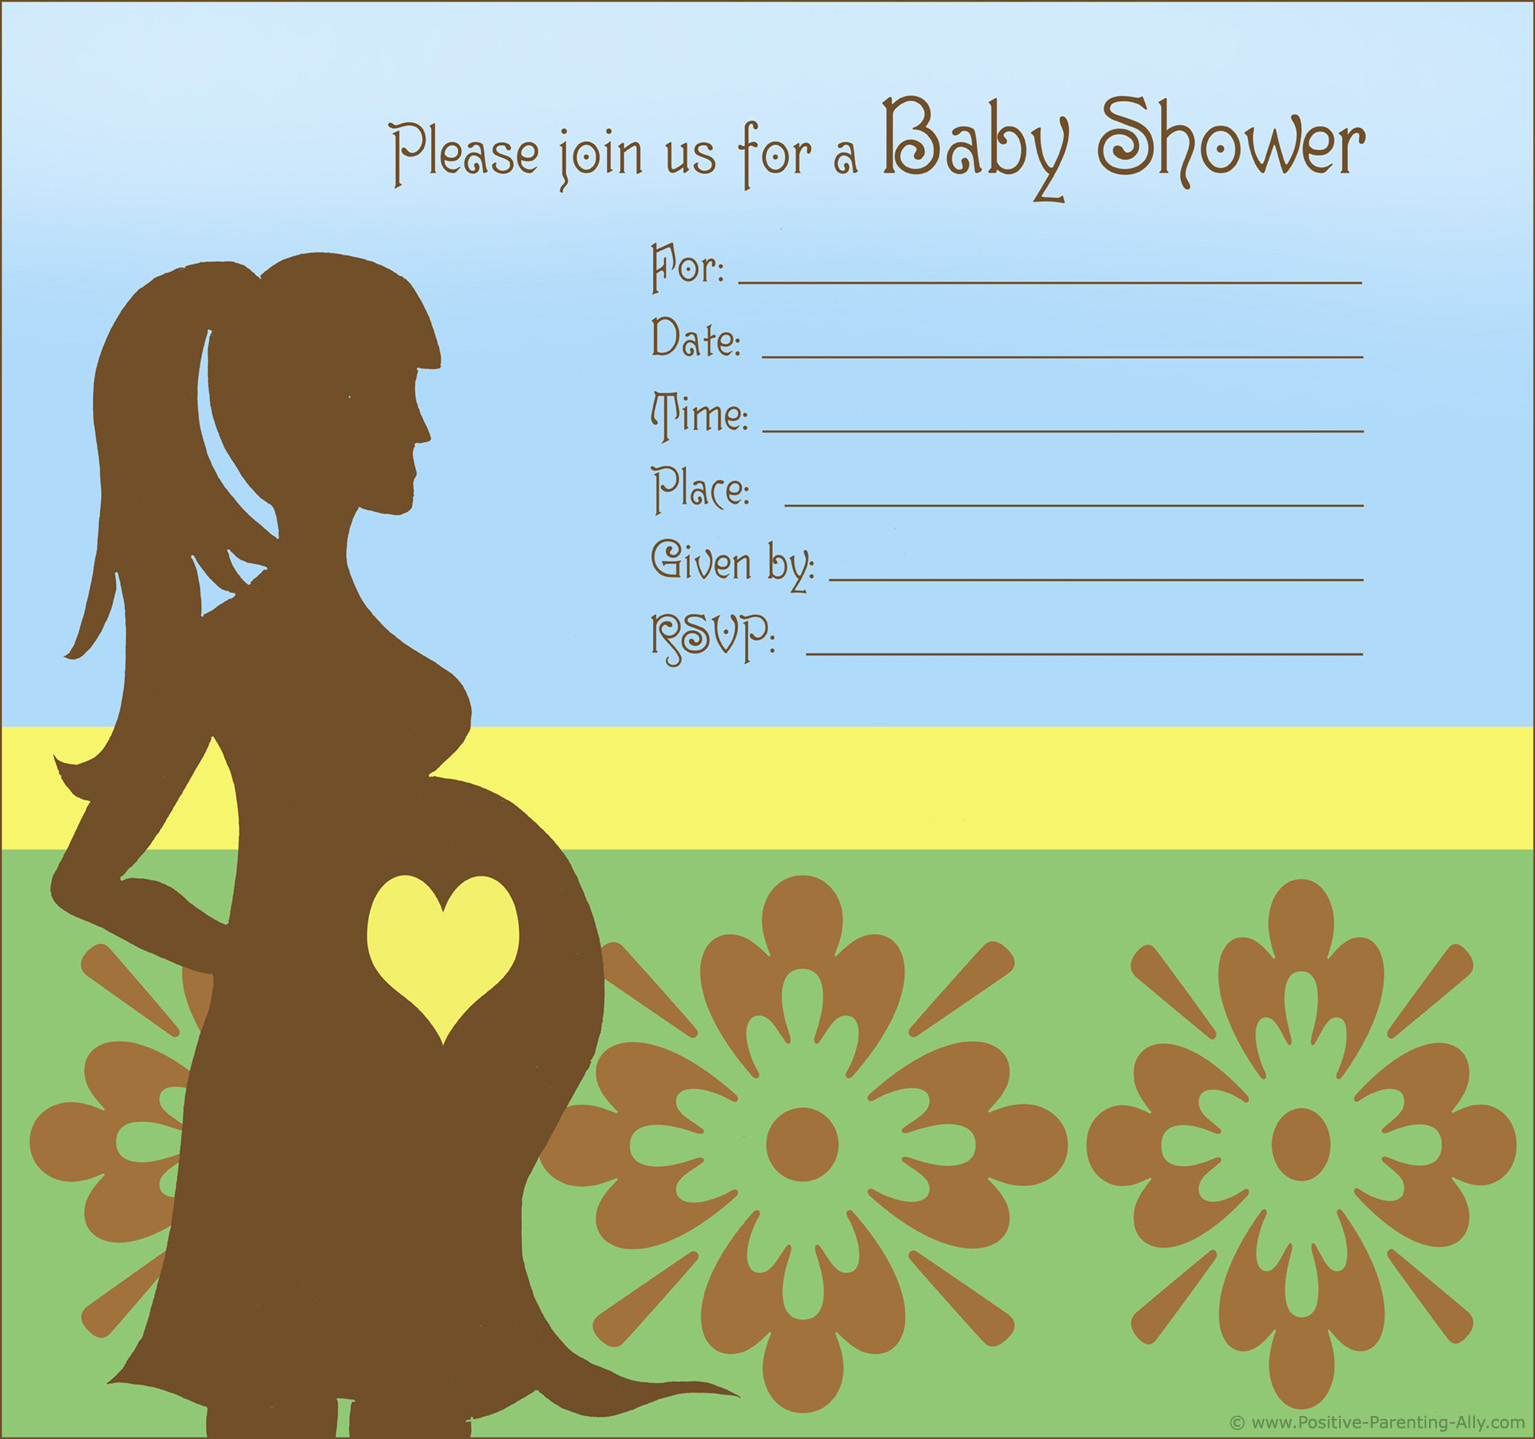 Free Printable Baby Shower Invitations in High Quality Resolution